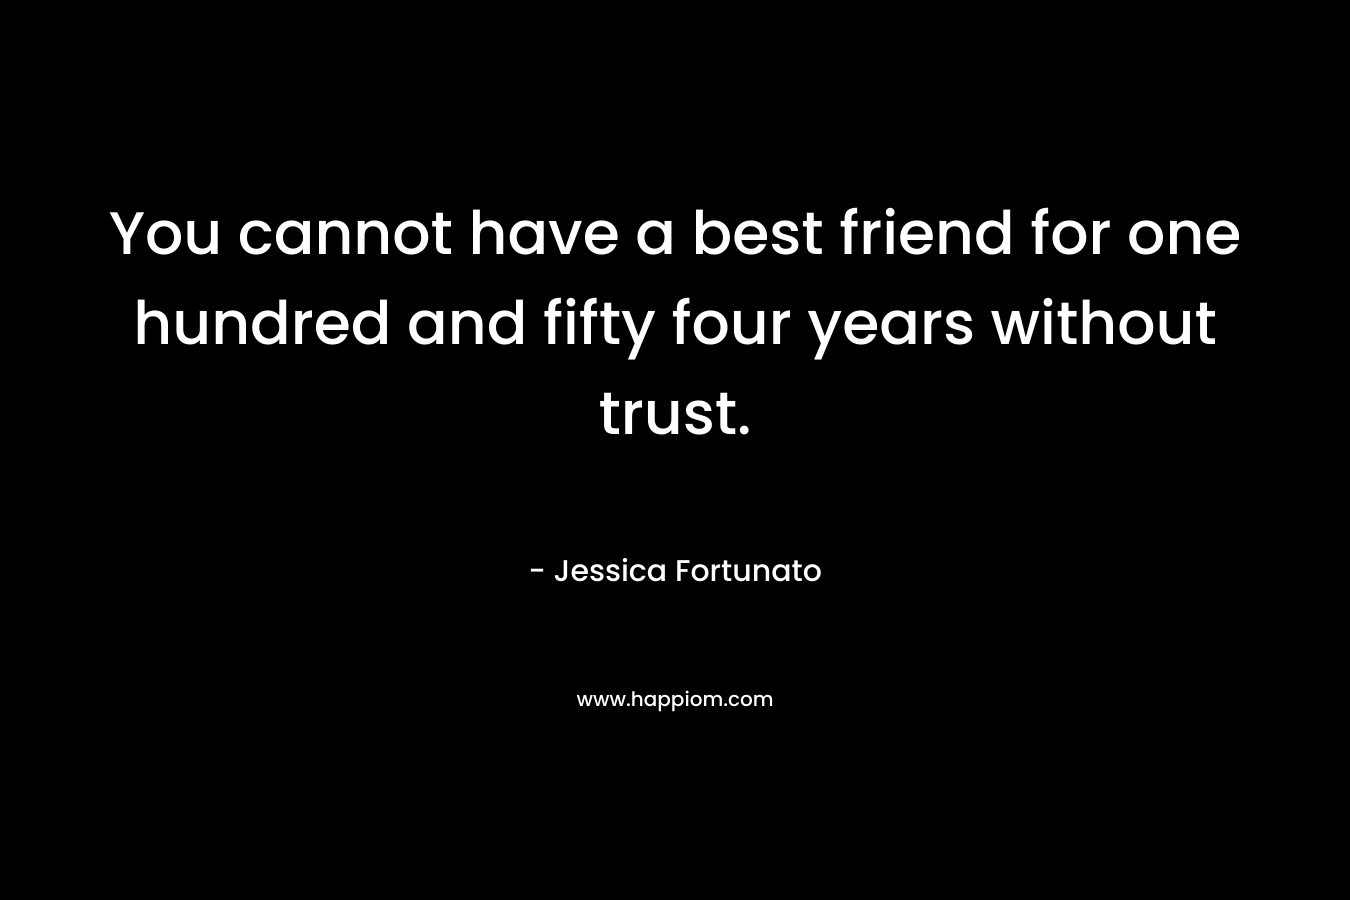 You cannot have a best friend for one hundred and fifty four years without trust.